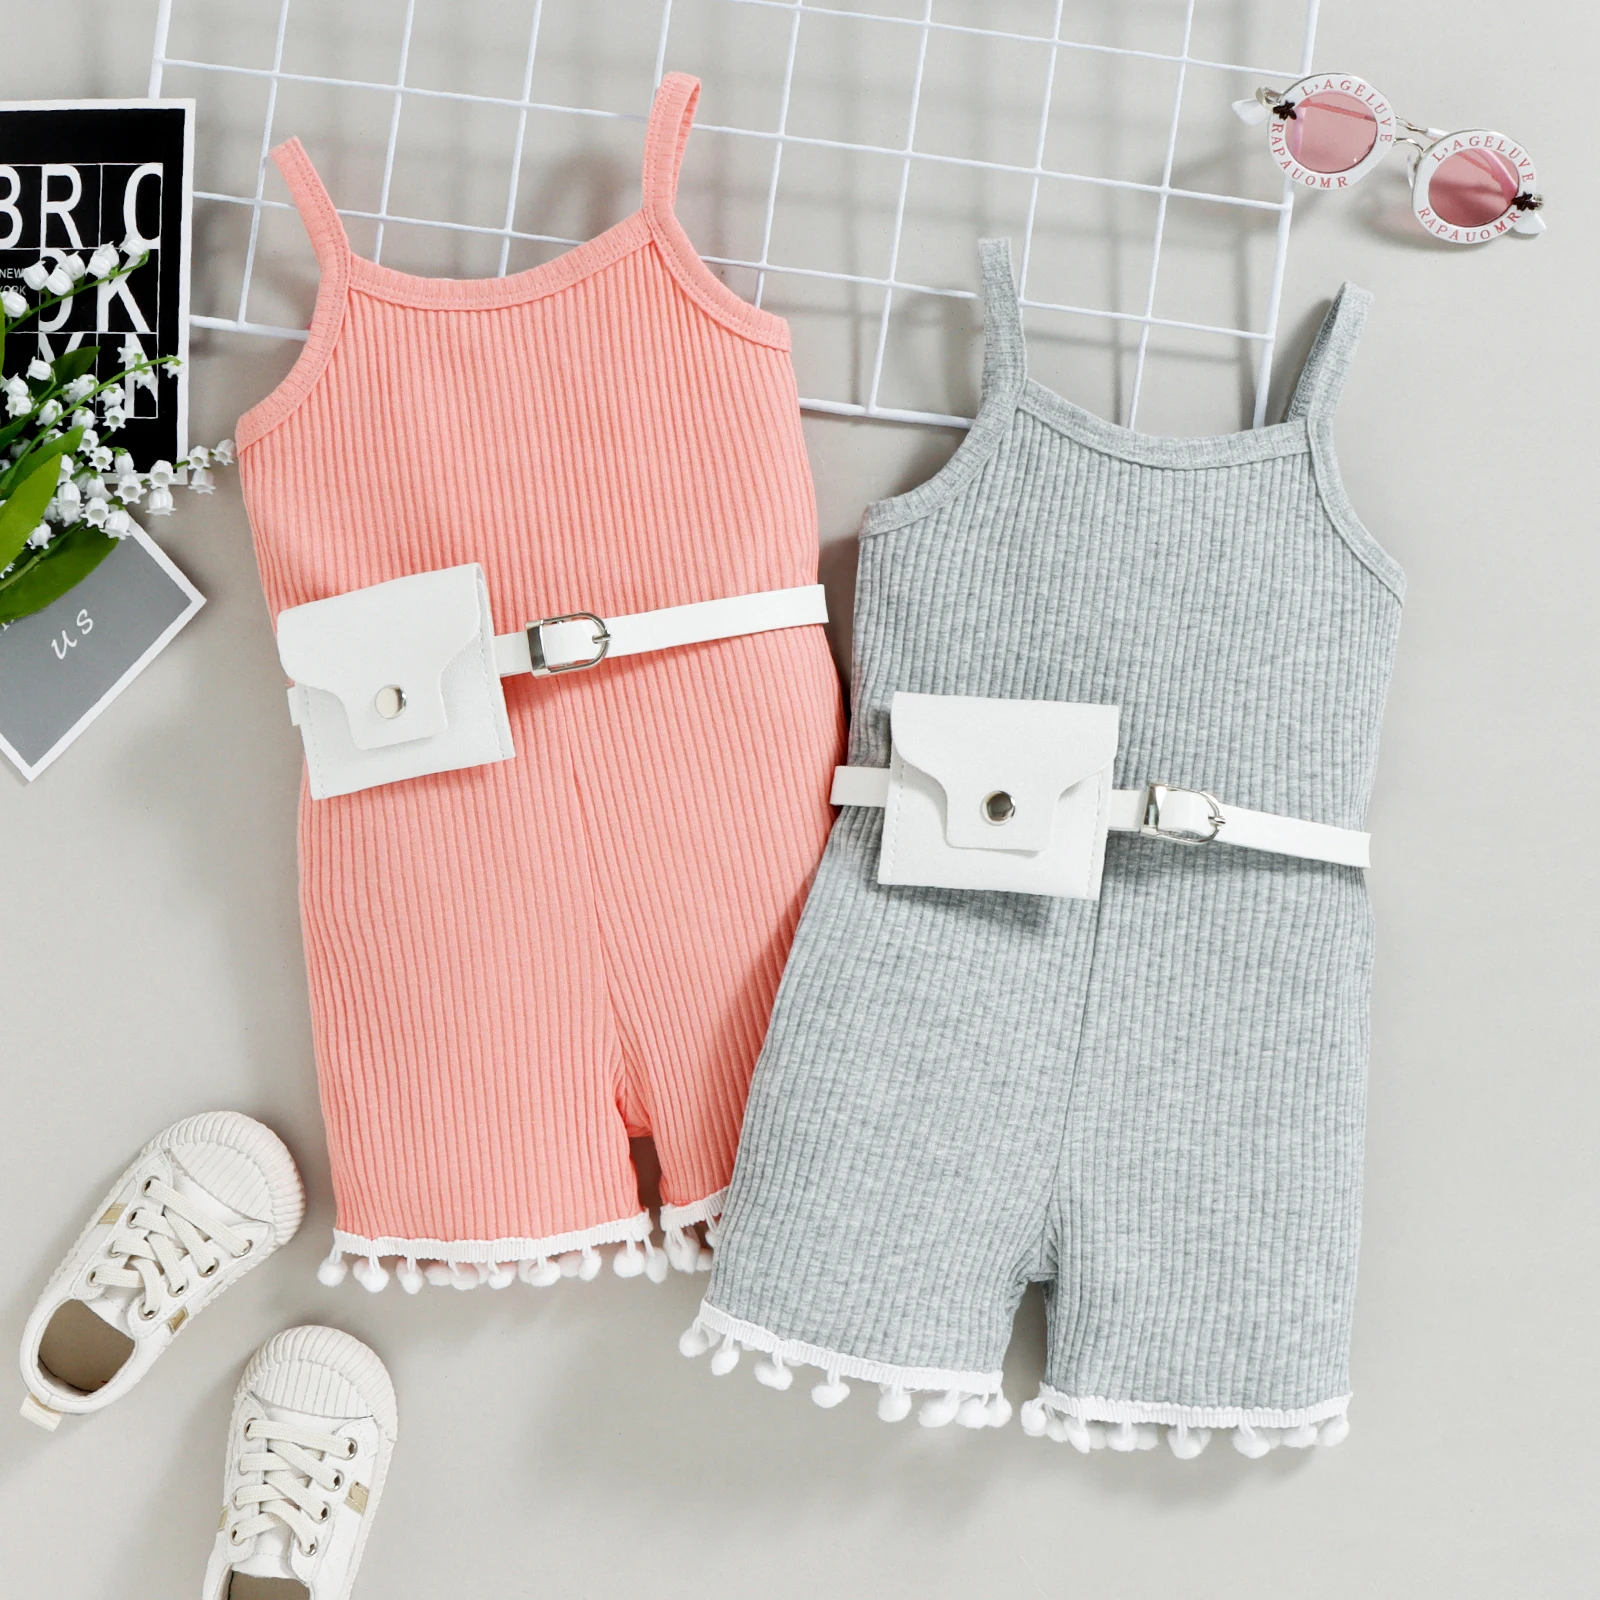 Baby Bodysuits medium Kids Summer Outfit, Contrast Color U-Neck Sleeveless Playsuit+ Waist Bag for Baby Girls, Pink/Gray, 9 Months-4 Years Baby Bodysuits are cool